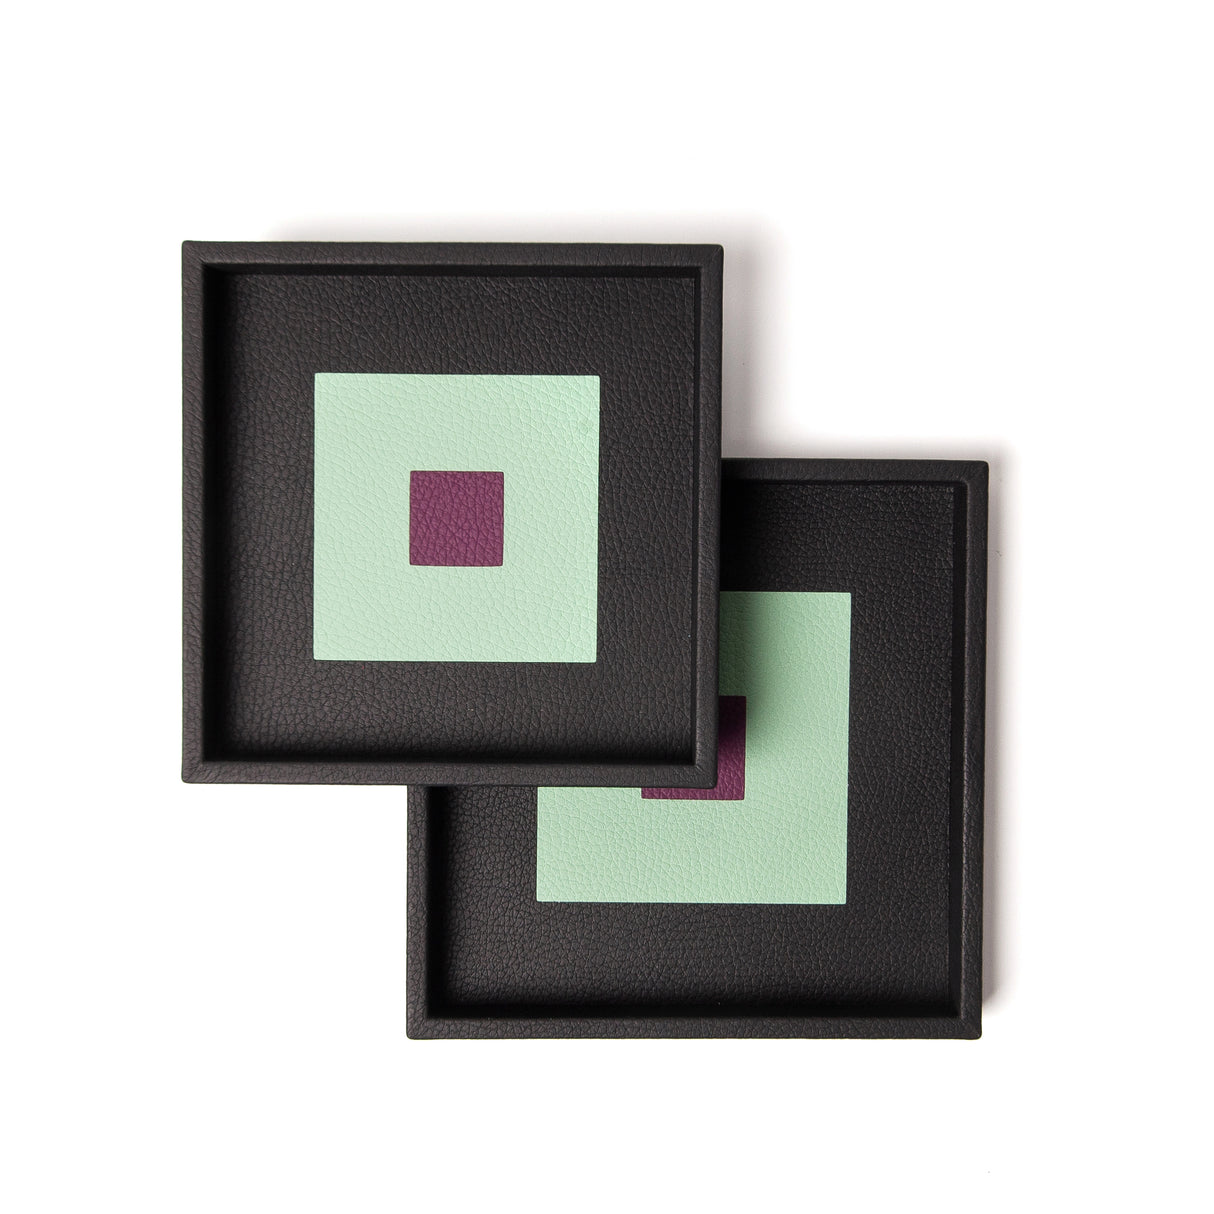 Madame Malachite Twinflame Trays (Set of 2 Square) Trays handcrafted using leather marquetry technique.